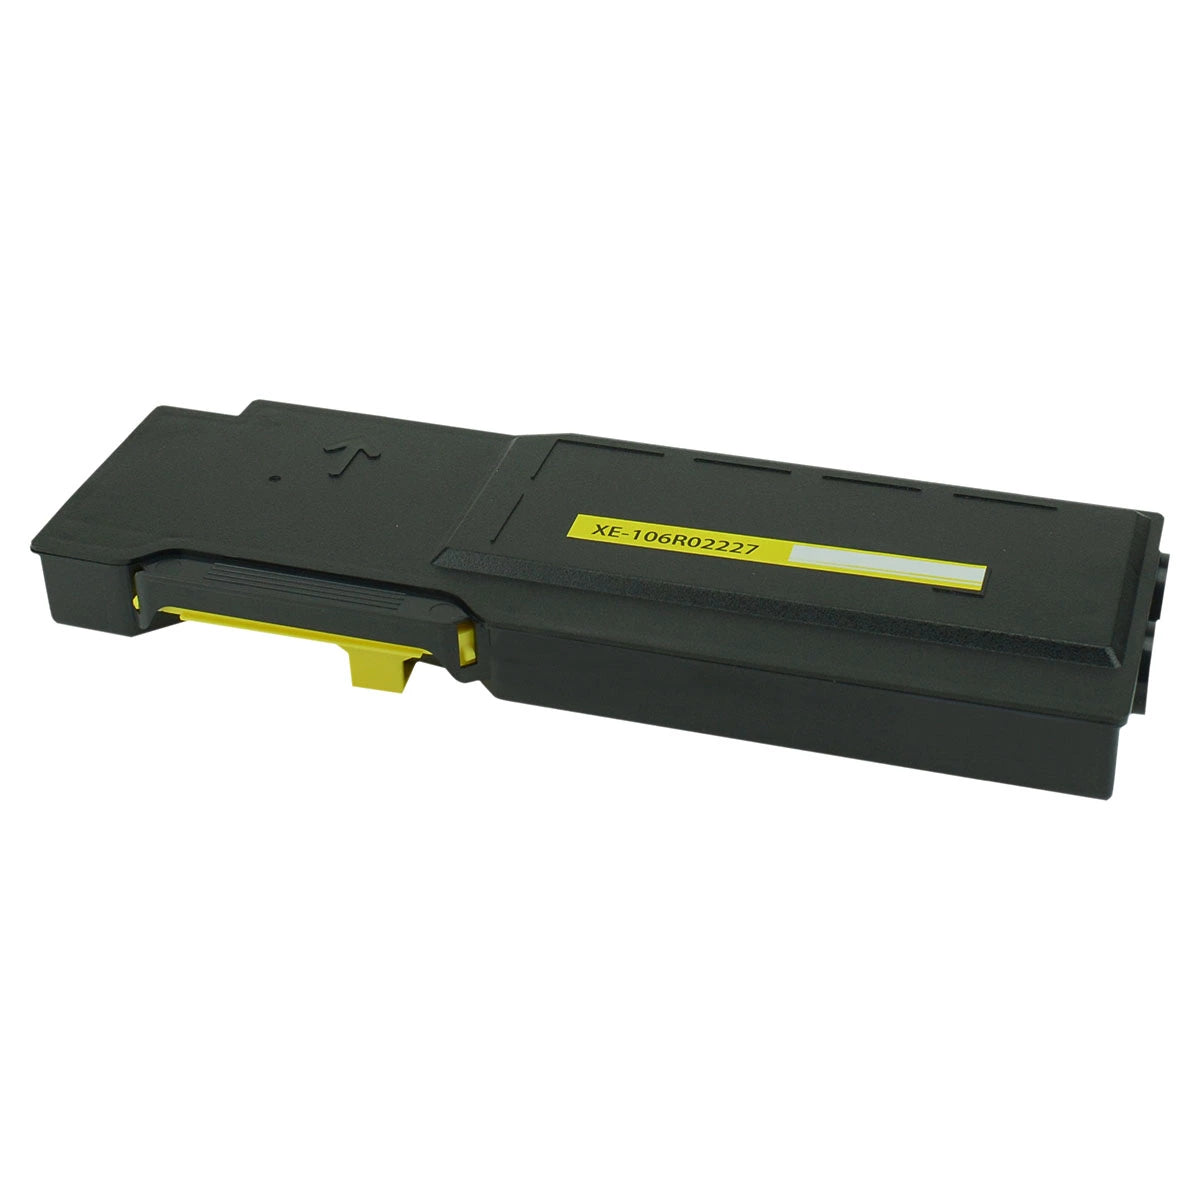 Xerox Phaser 6600/ WorkCentre 6605 (106R02227) Yellow High Capacity Compatible Toner Cartridge 